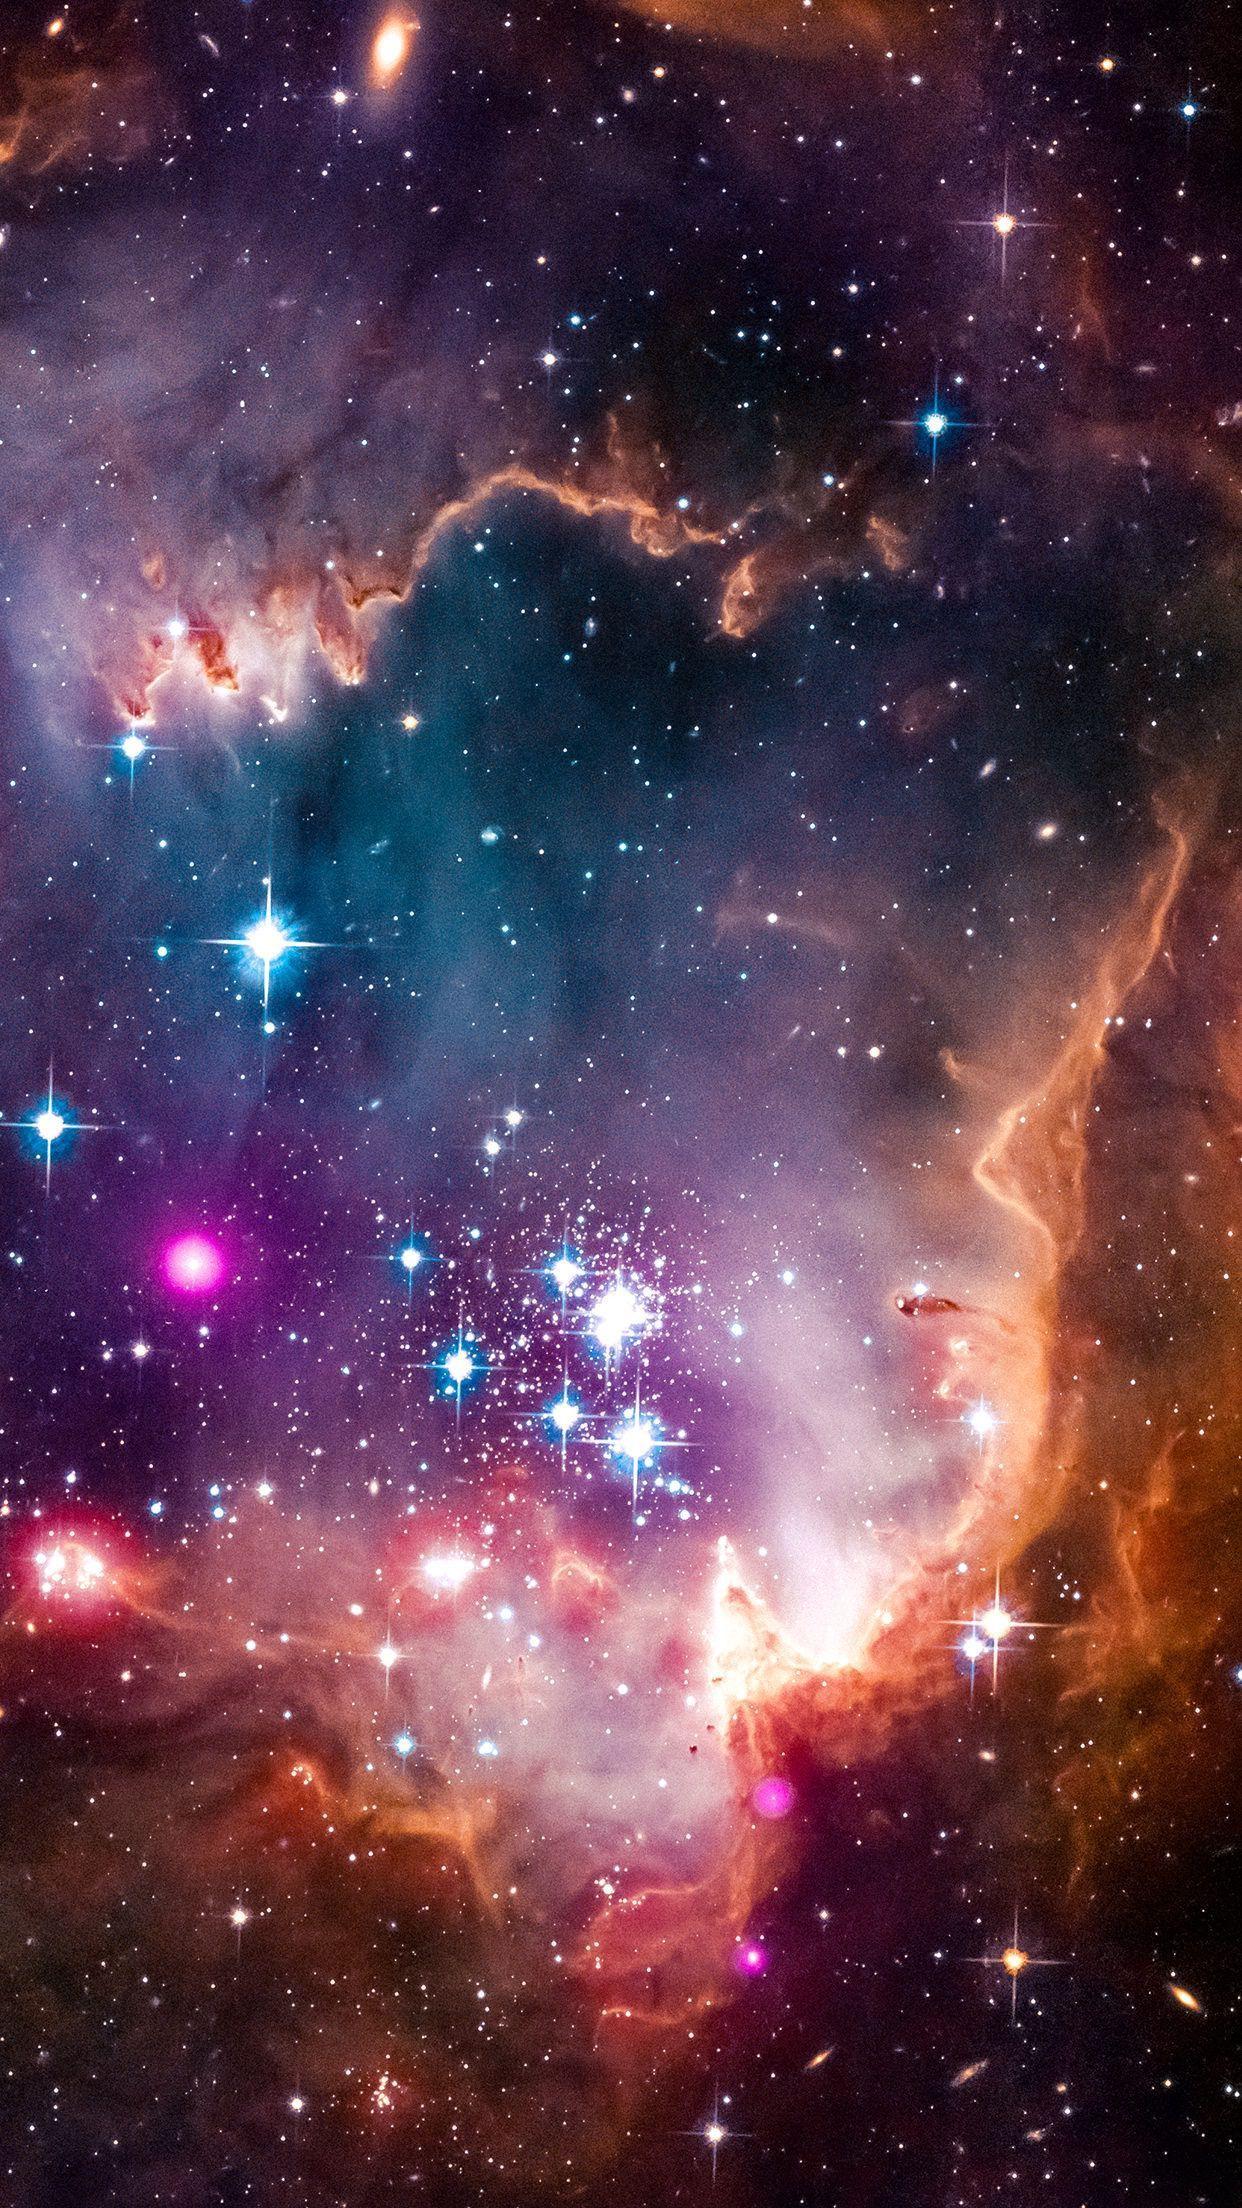 Universe Iphone Wallpapers Wallpaper Cave